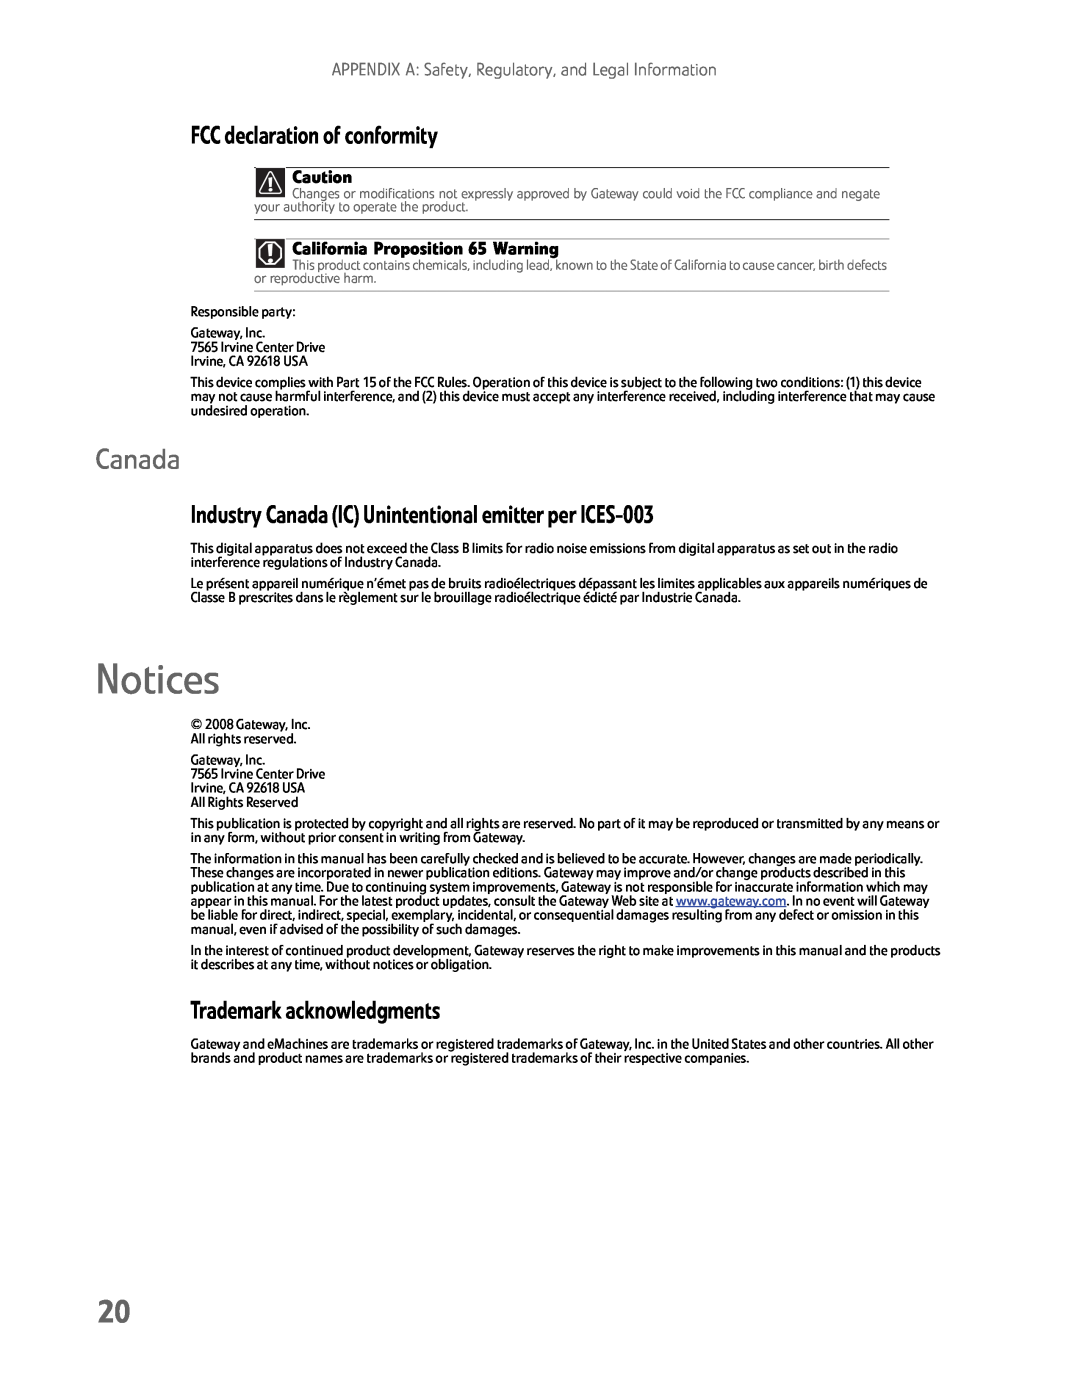 Gateway HD2202 manual Notices, FCC declaration of conformity, Industry Canada IC Unintentional emitter per ICES-003 